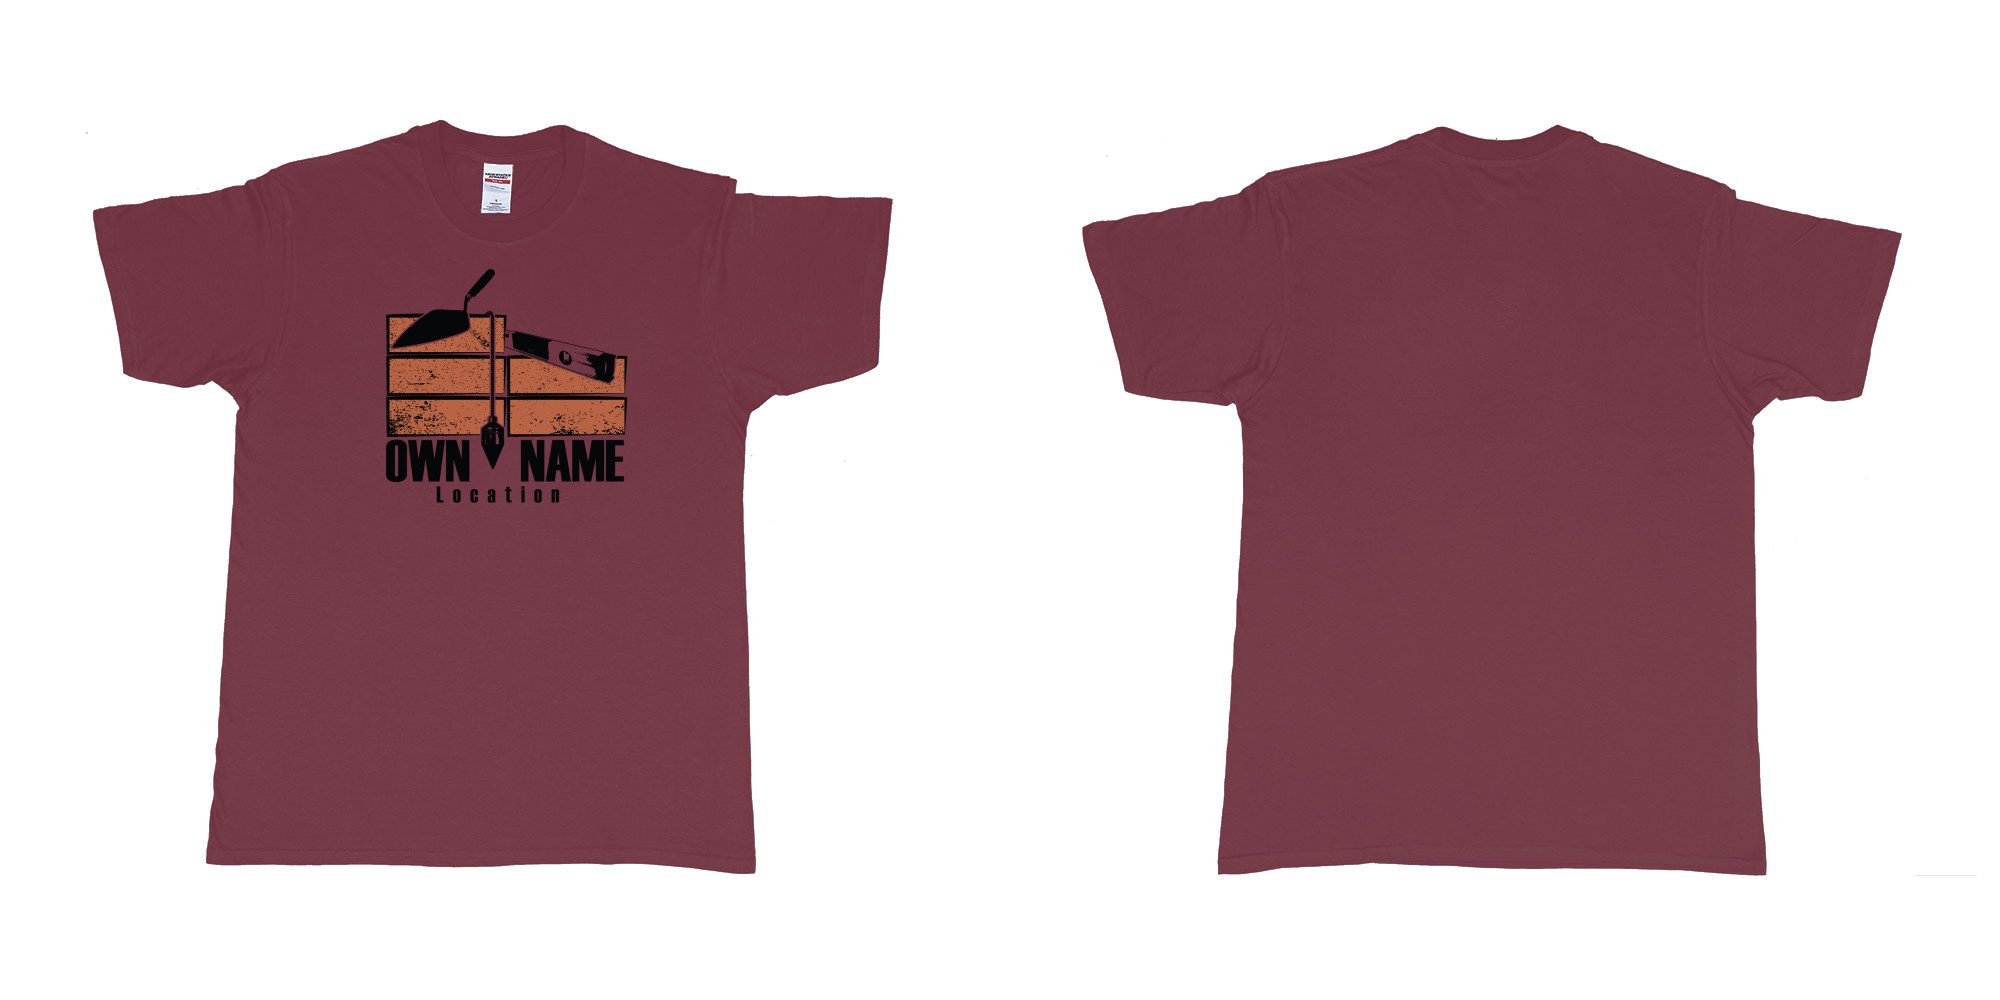 Custom tshirt design brick layer builder own custom company printing name location trowel in fabric color marron choice your own text made in Bali by The Pirate Way